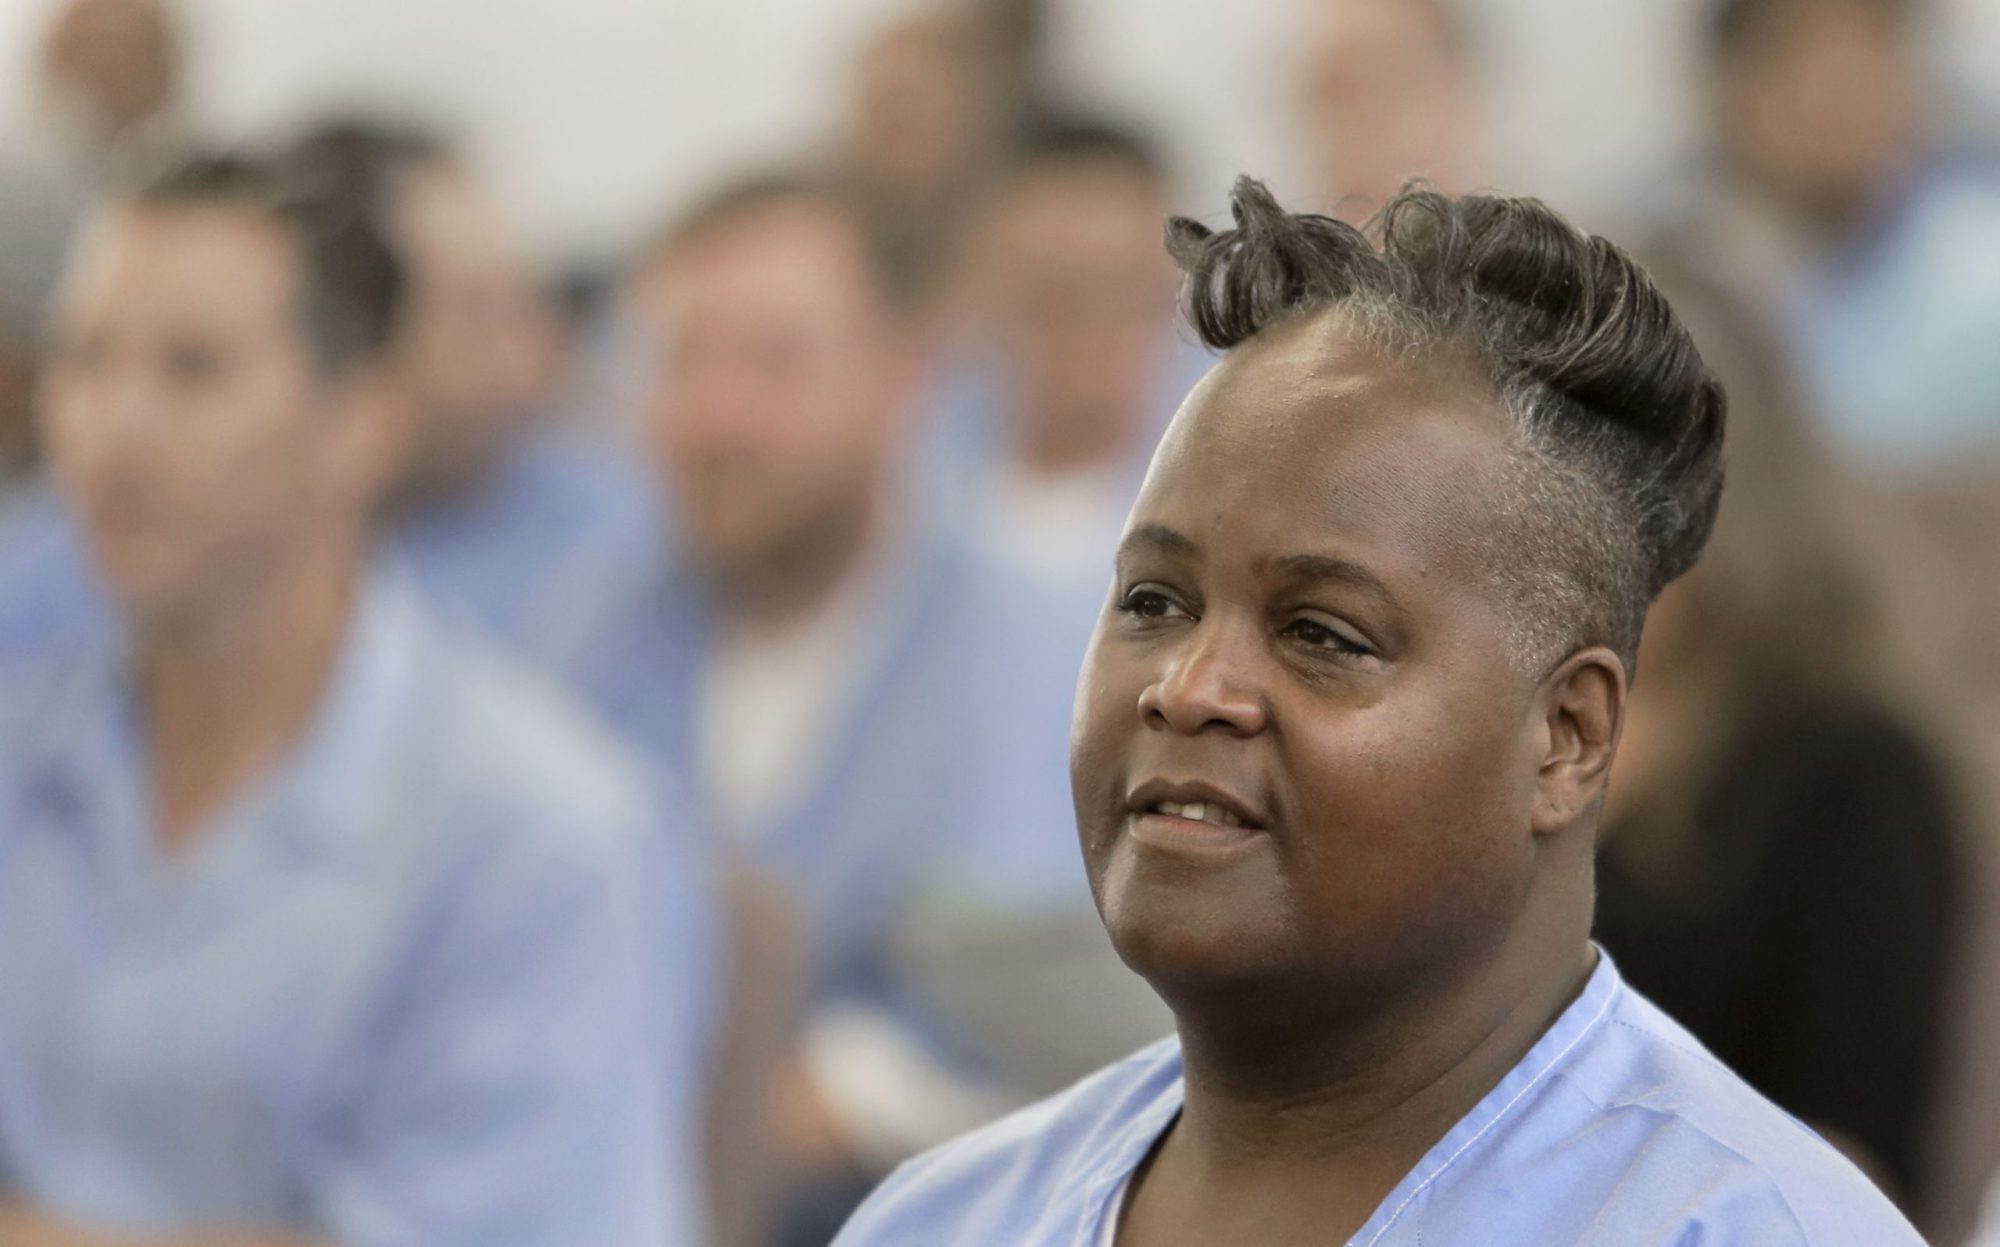 Transgender inmate, Jarvis "Lady Jae" Clark, before the start of the show, as inmates inside San Quentin State Prison prepare to perform Shakespeare's play Julius Caesar as seen on Fri. May 15, 2015, in San Rafael, Calif. Photo By Michael Macor/The San Francisco Chronicle via Getty Images